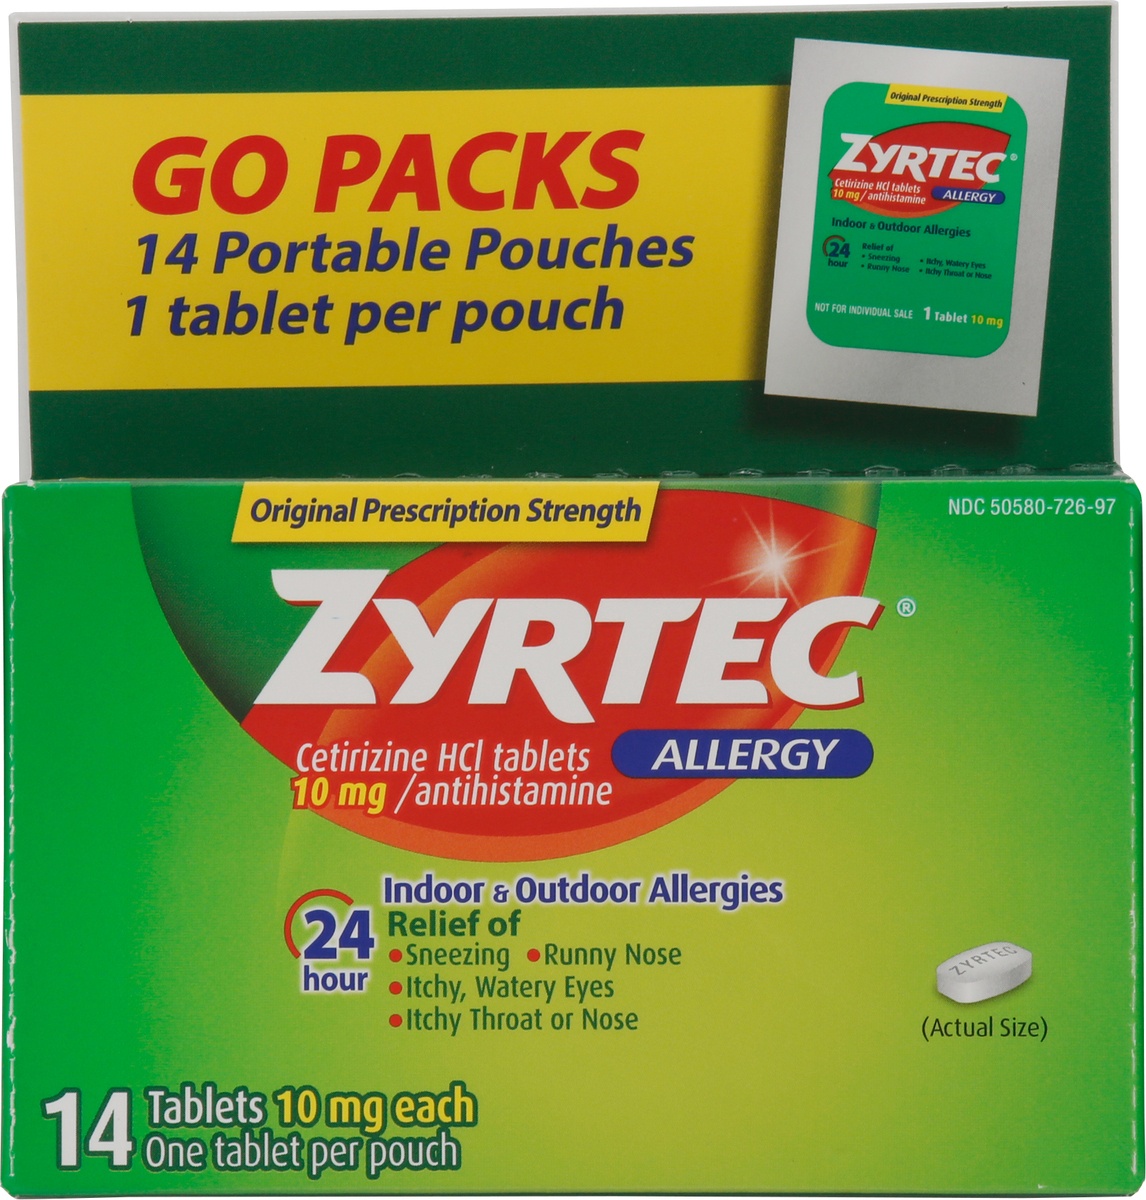 slide 3 of 9, Zyrtec 24 Hour Allergy Relief Tablets, Indoor & Outdoor Allergy Medicine with Cetirizine HCl per Antihistamine Tablet, On-the-Go Relief, Individual Travel Pouches, (14, 14 ct